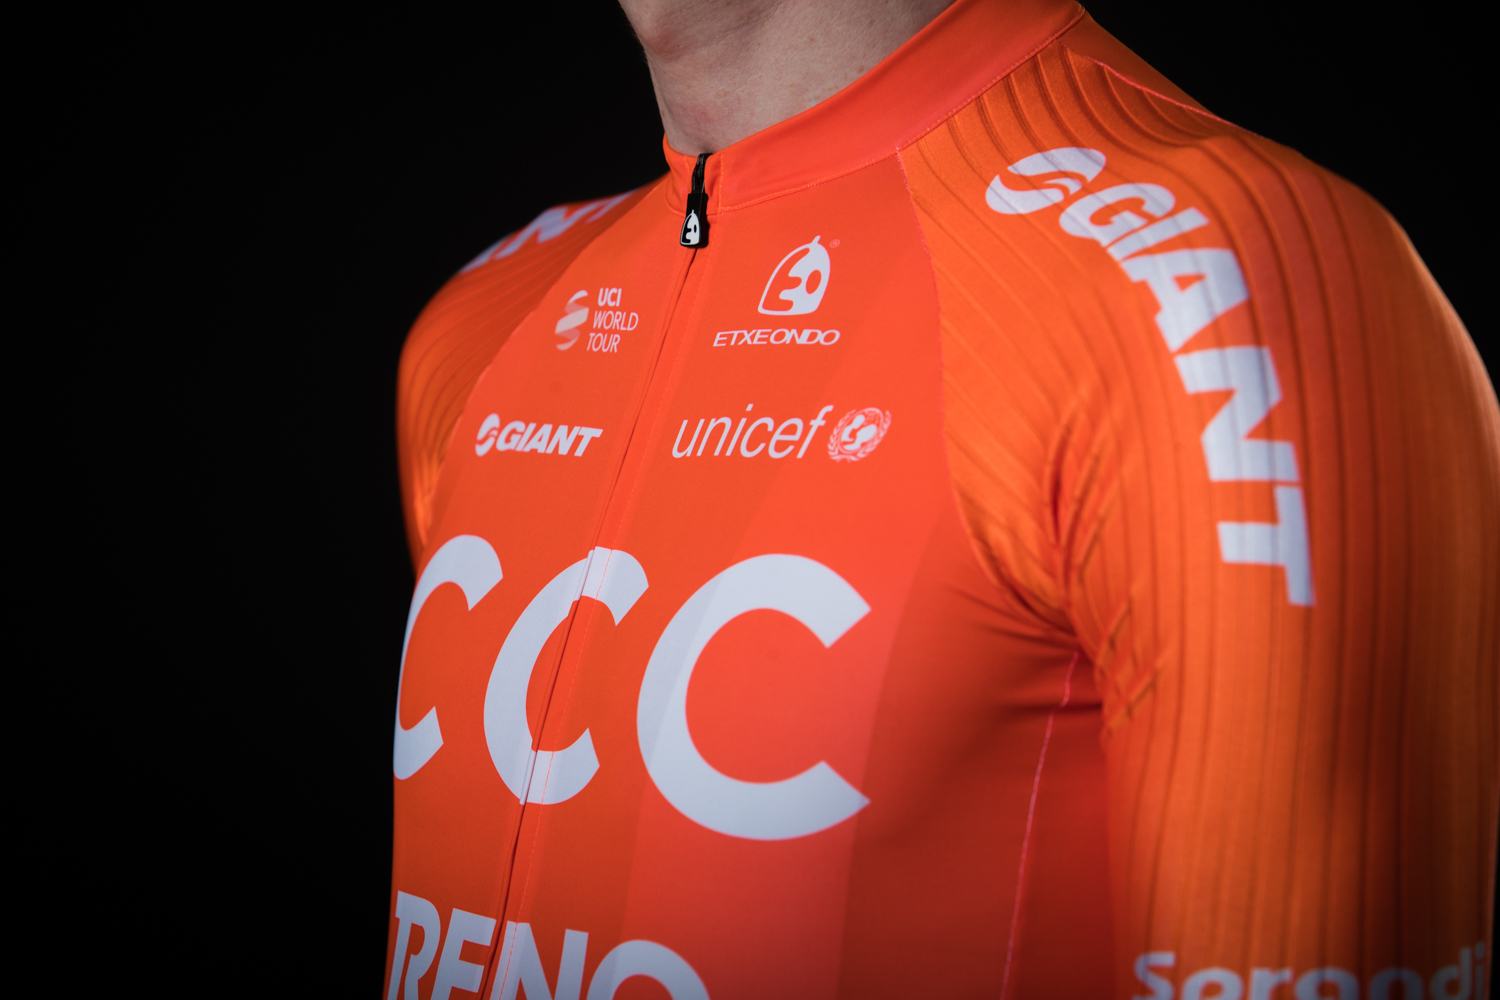 ccc cycling team jersey